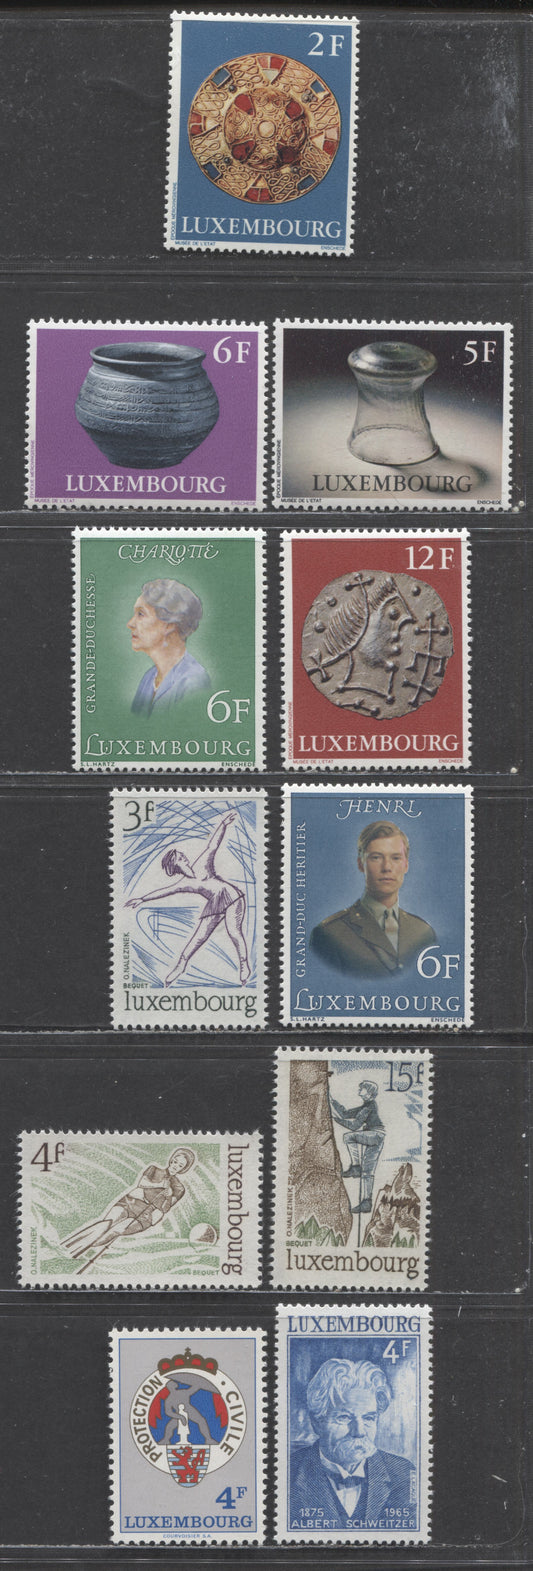 Luxembourg SC#564/584 1975-1976 Schweitzer & Archaeological Treasures Issues, 11 VFNH Singles, Click on Listing to See ALL Pictures, 2022 Scott Classic Cat. $8.2 USD